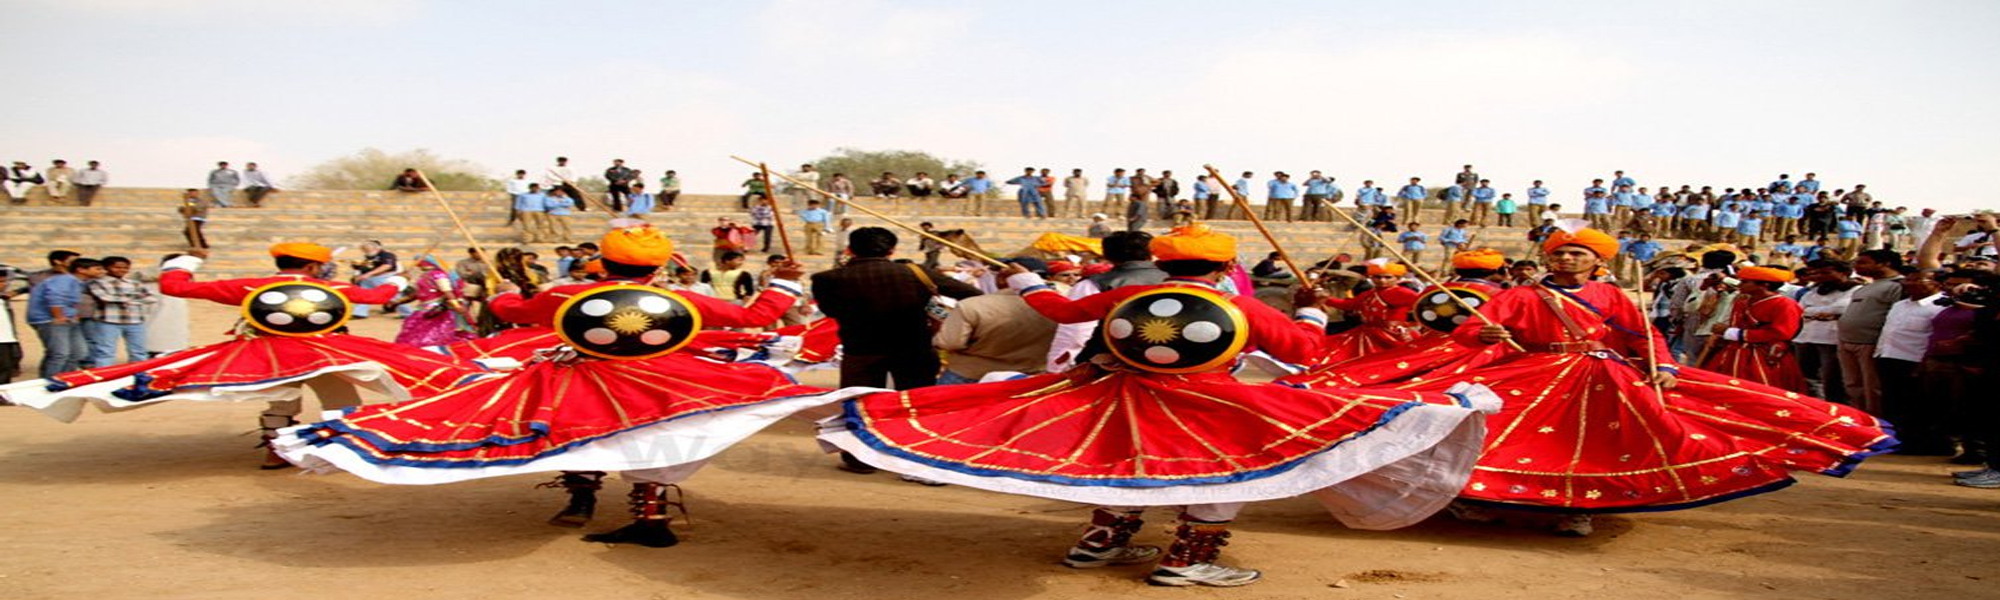 Desert Festival Tour in India with Desert Triangle Tour in India  